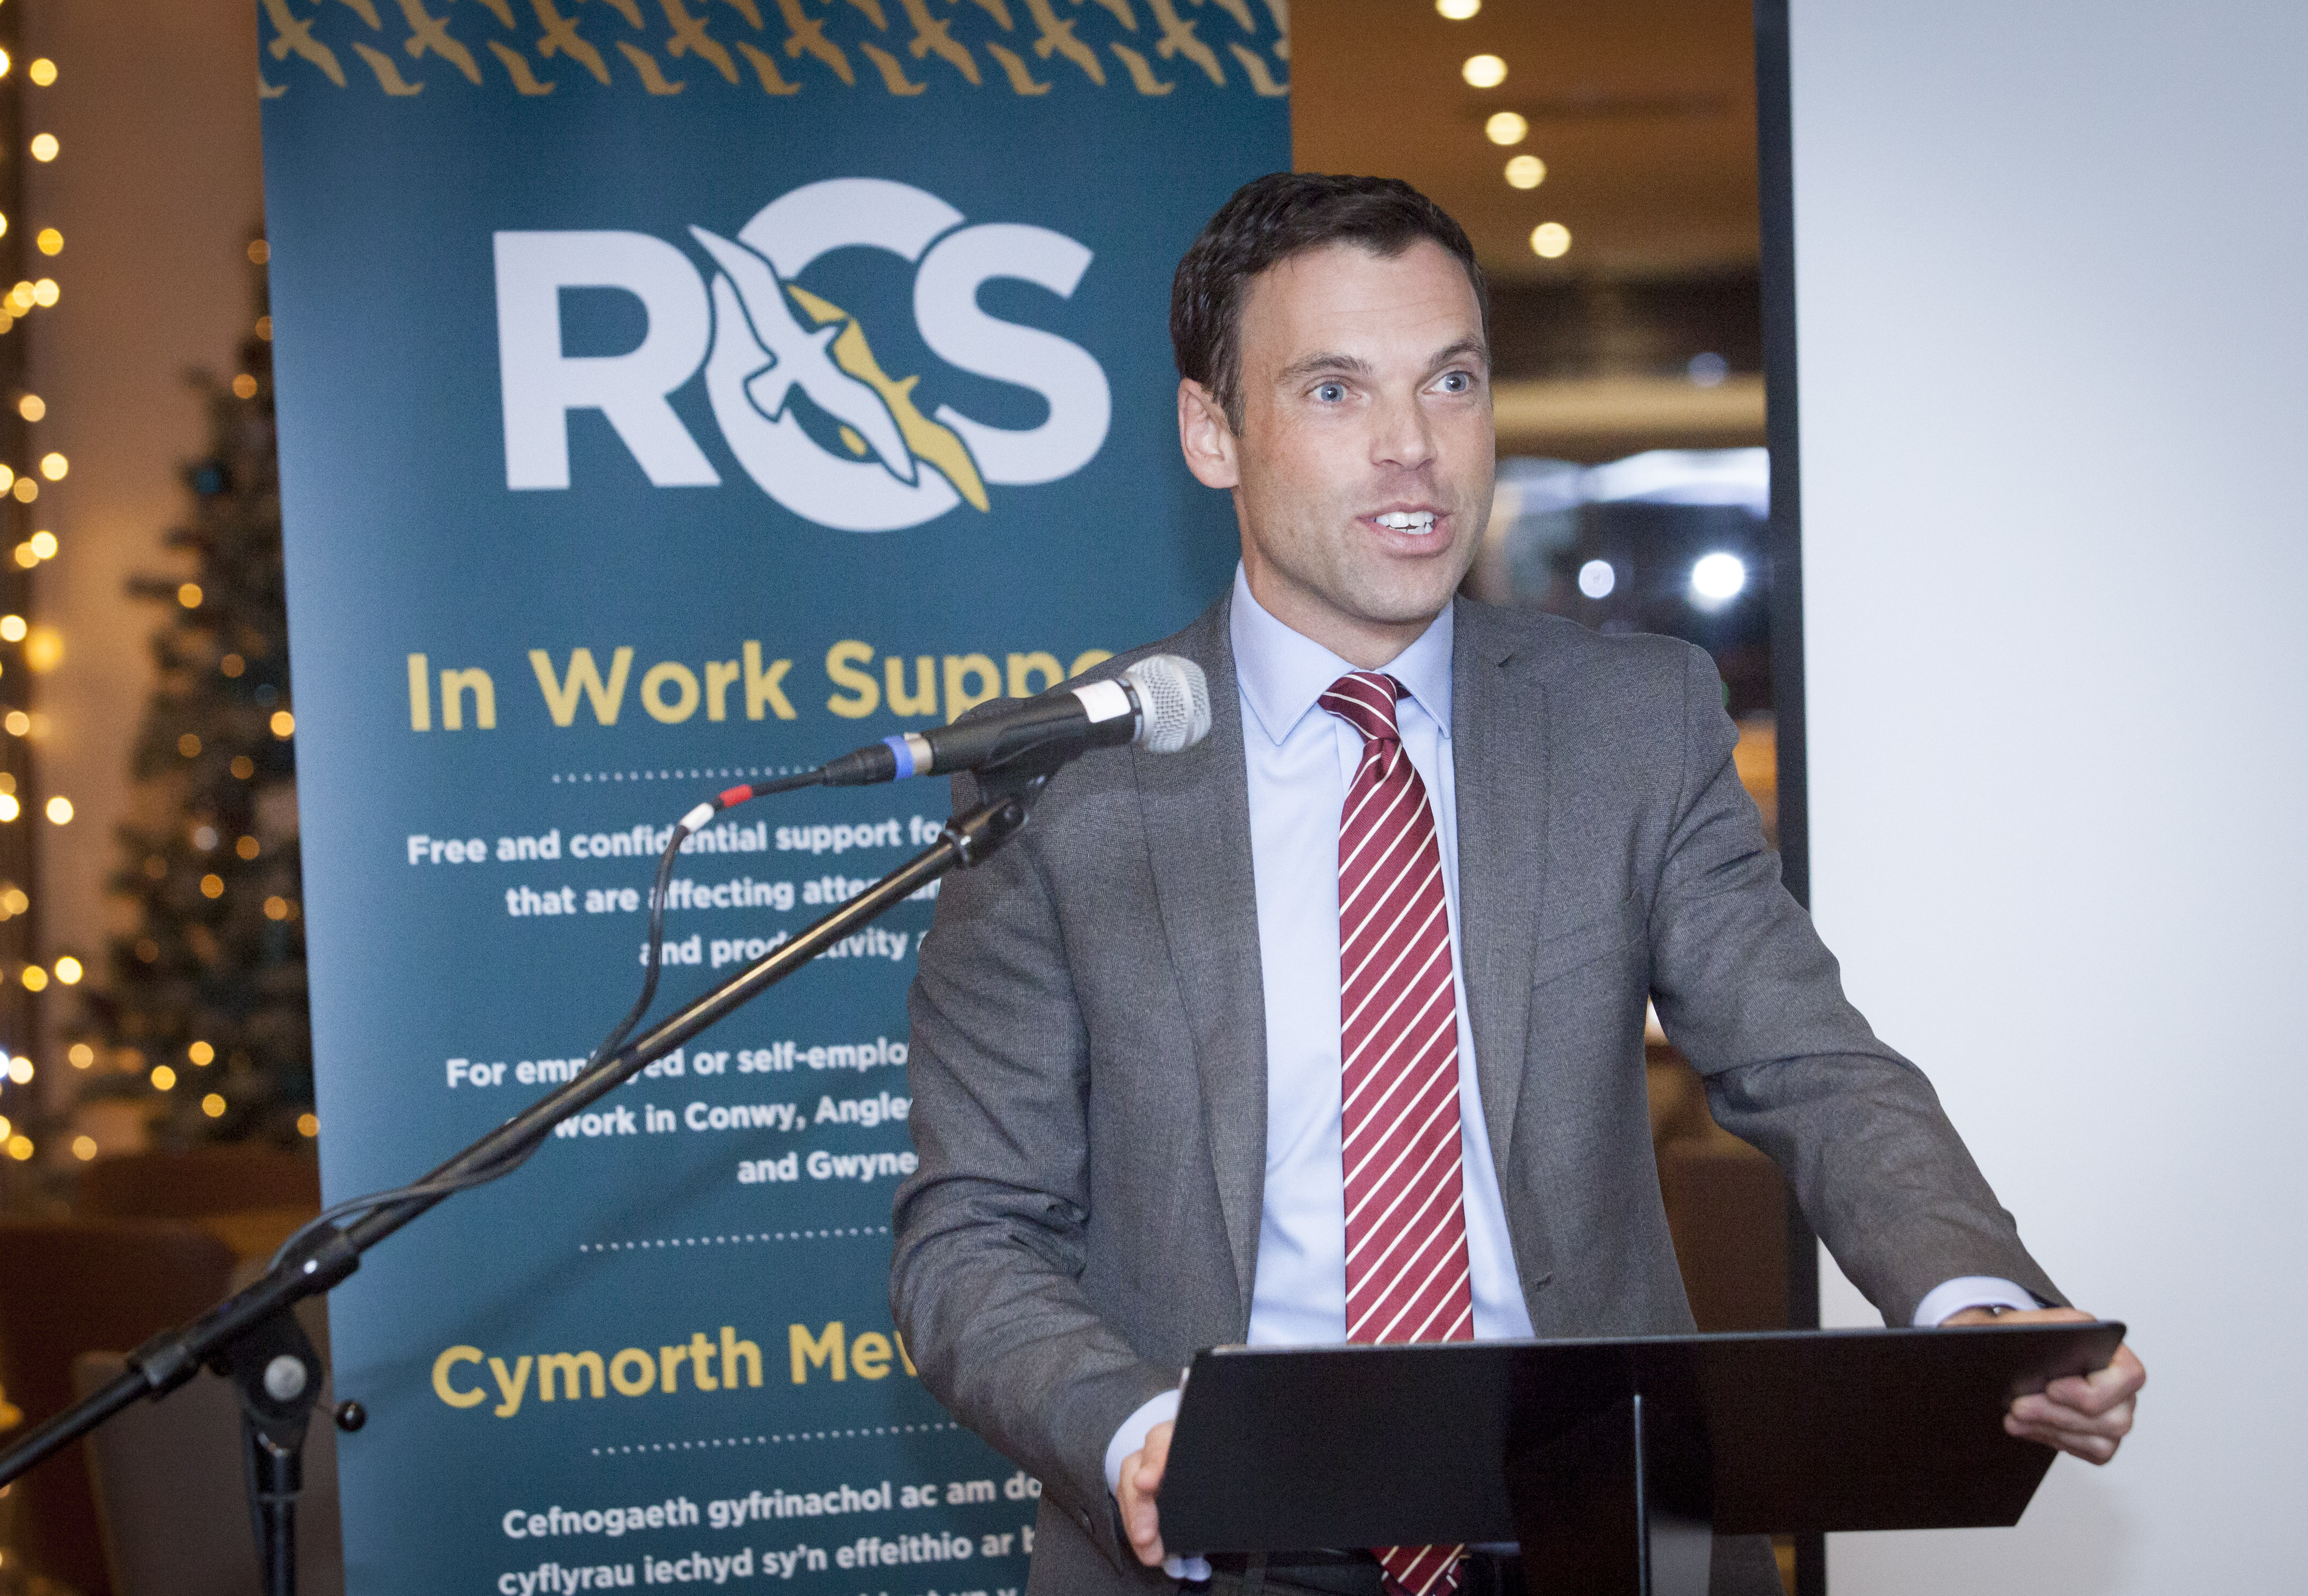 Therapists and other businesses invited to apply for a share of £6.2m funding to help deliver pioneering RCS Wales’ in work support scheme